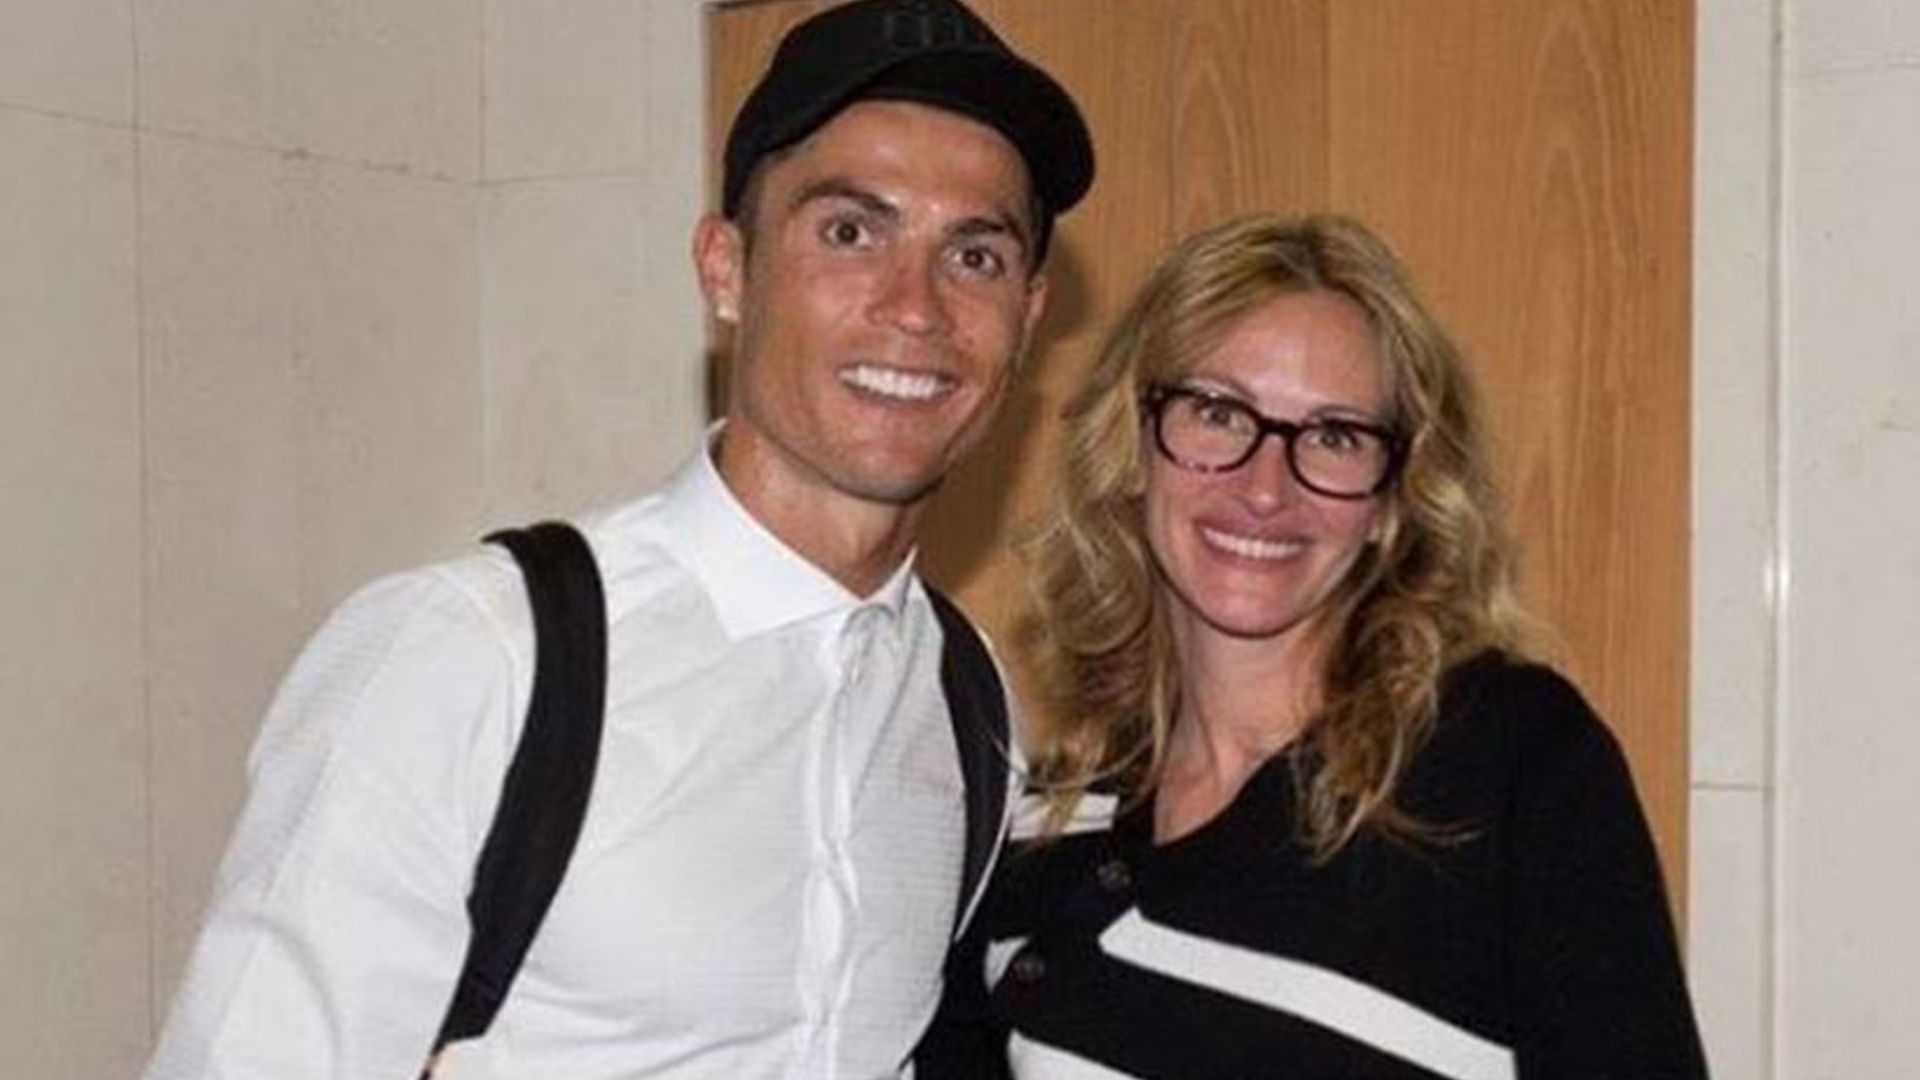 Julia Roberts has sweet fangirl moment when meeting the Real Madrid team - watch the video